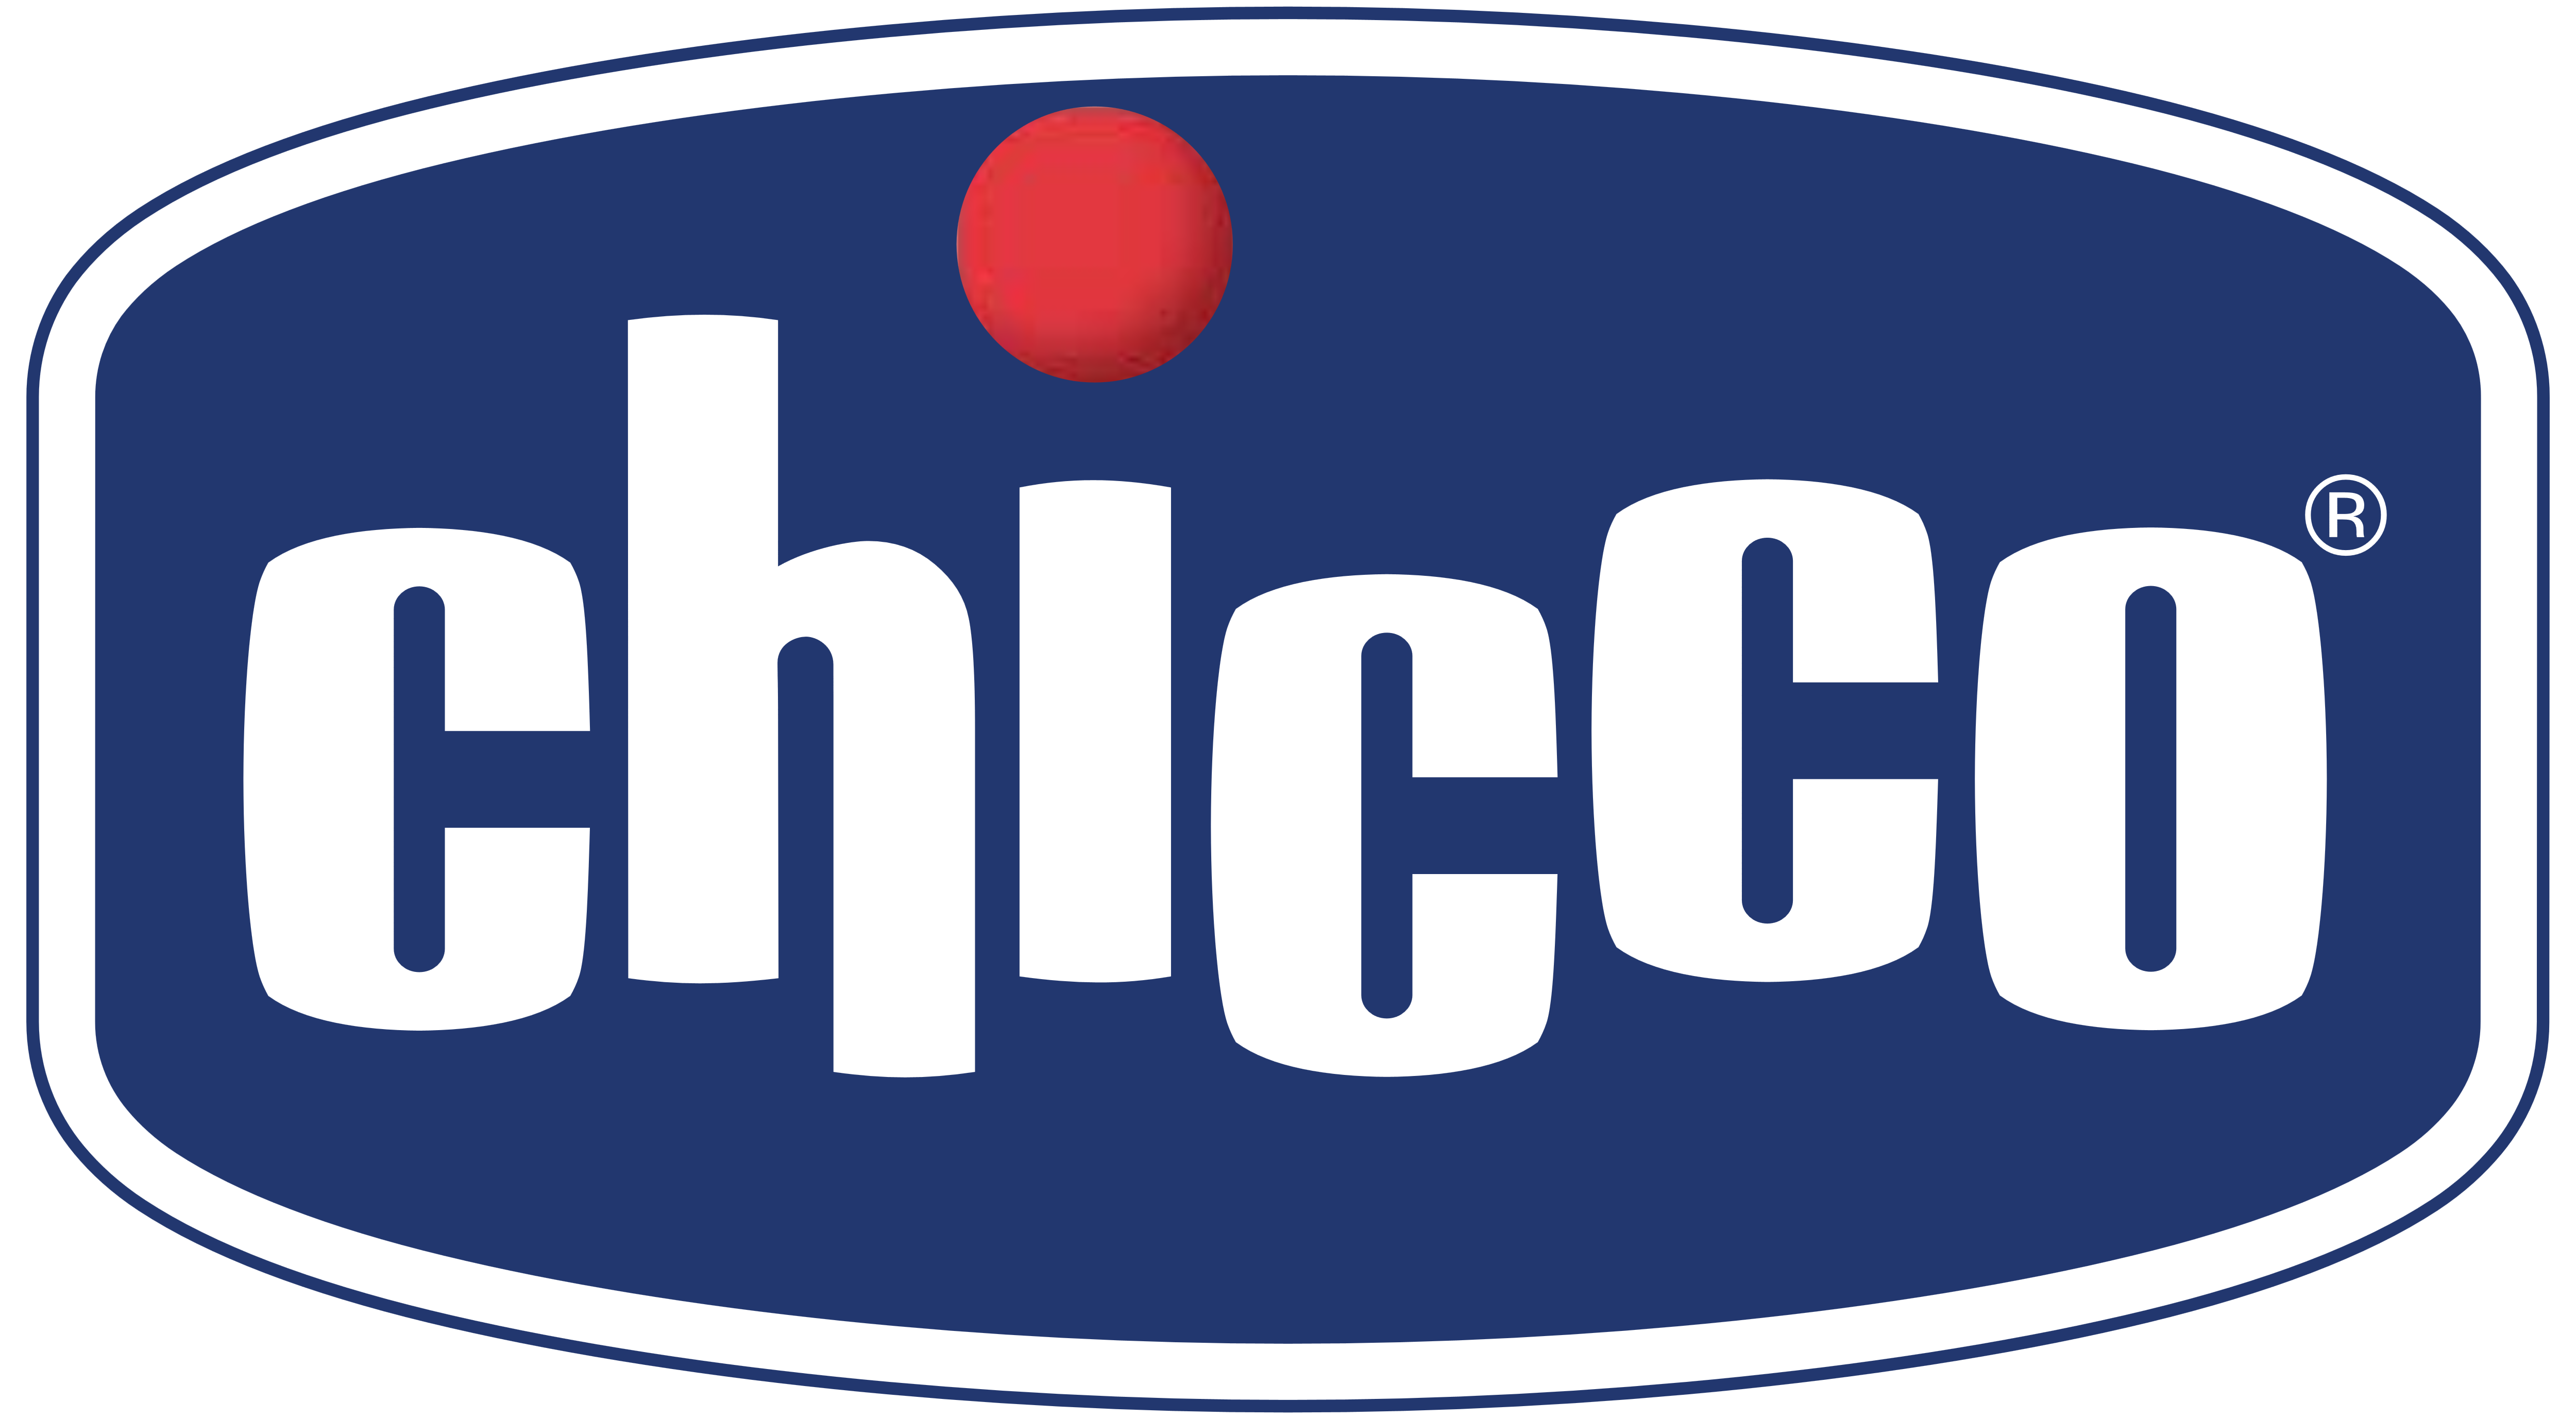 Chicco – Logos Download